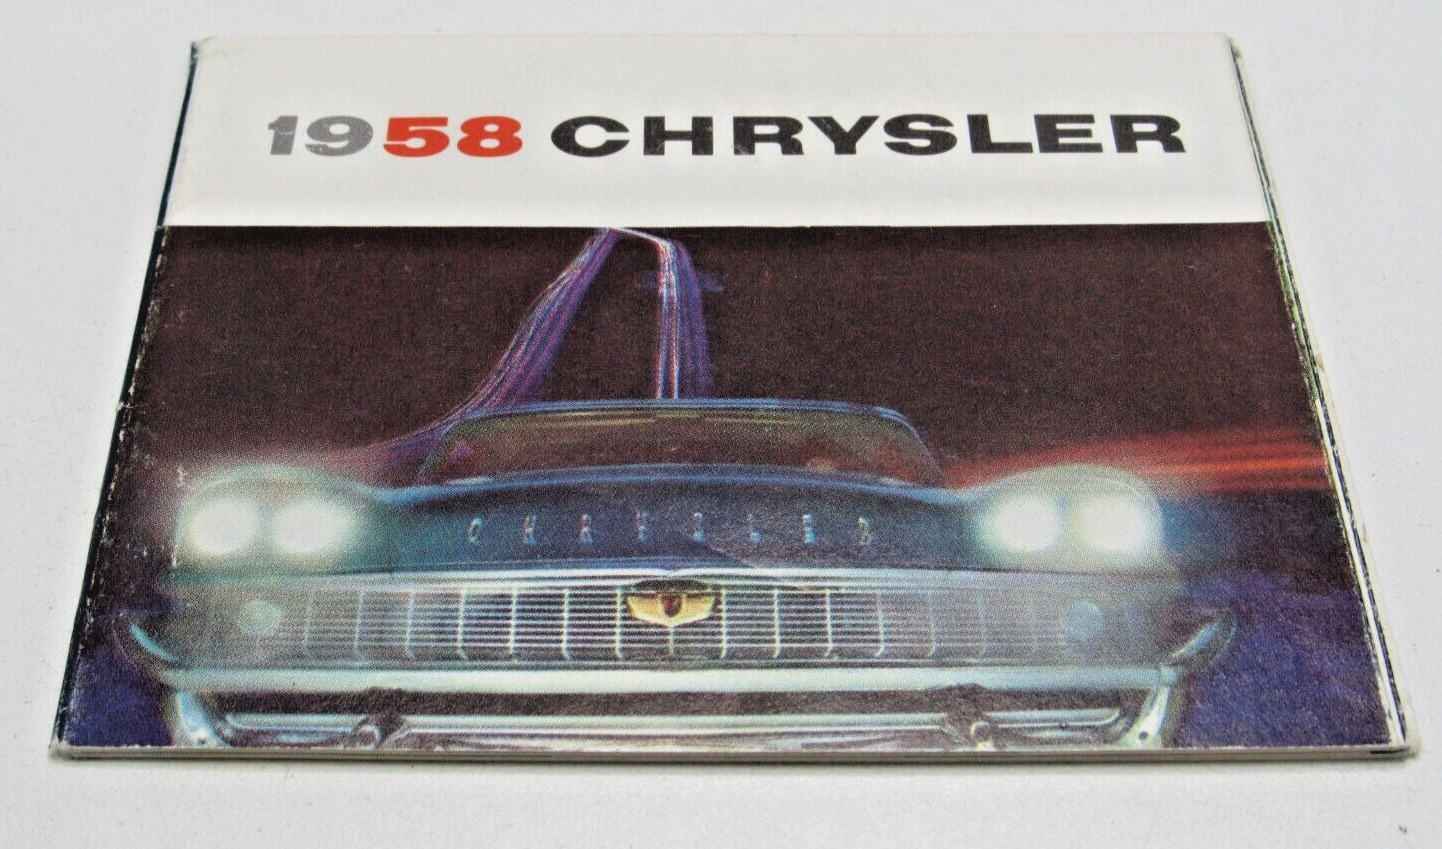 Vintage 1958 Chrysler Small Fold Out Sales Brochure #PM-7